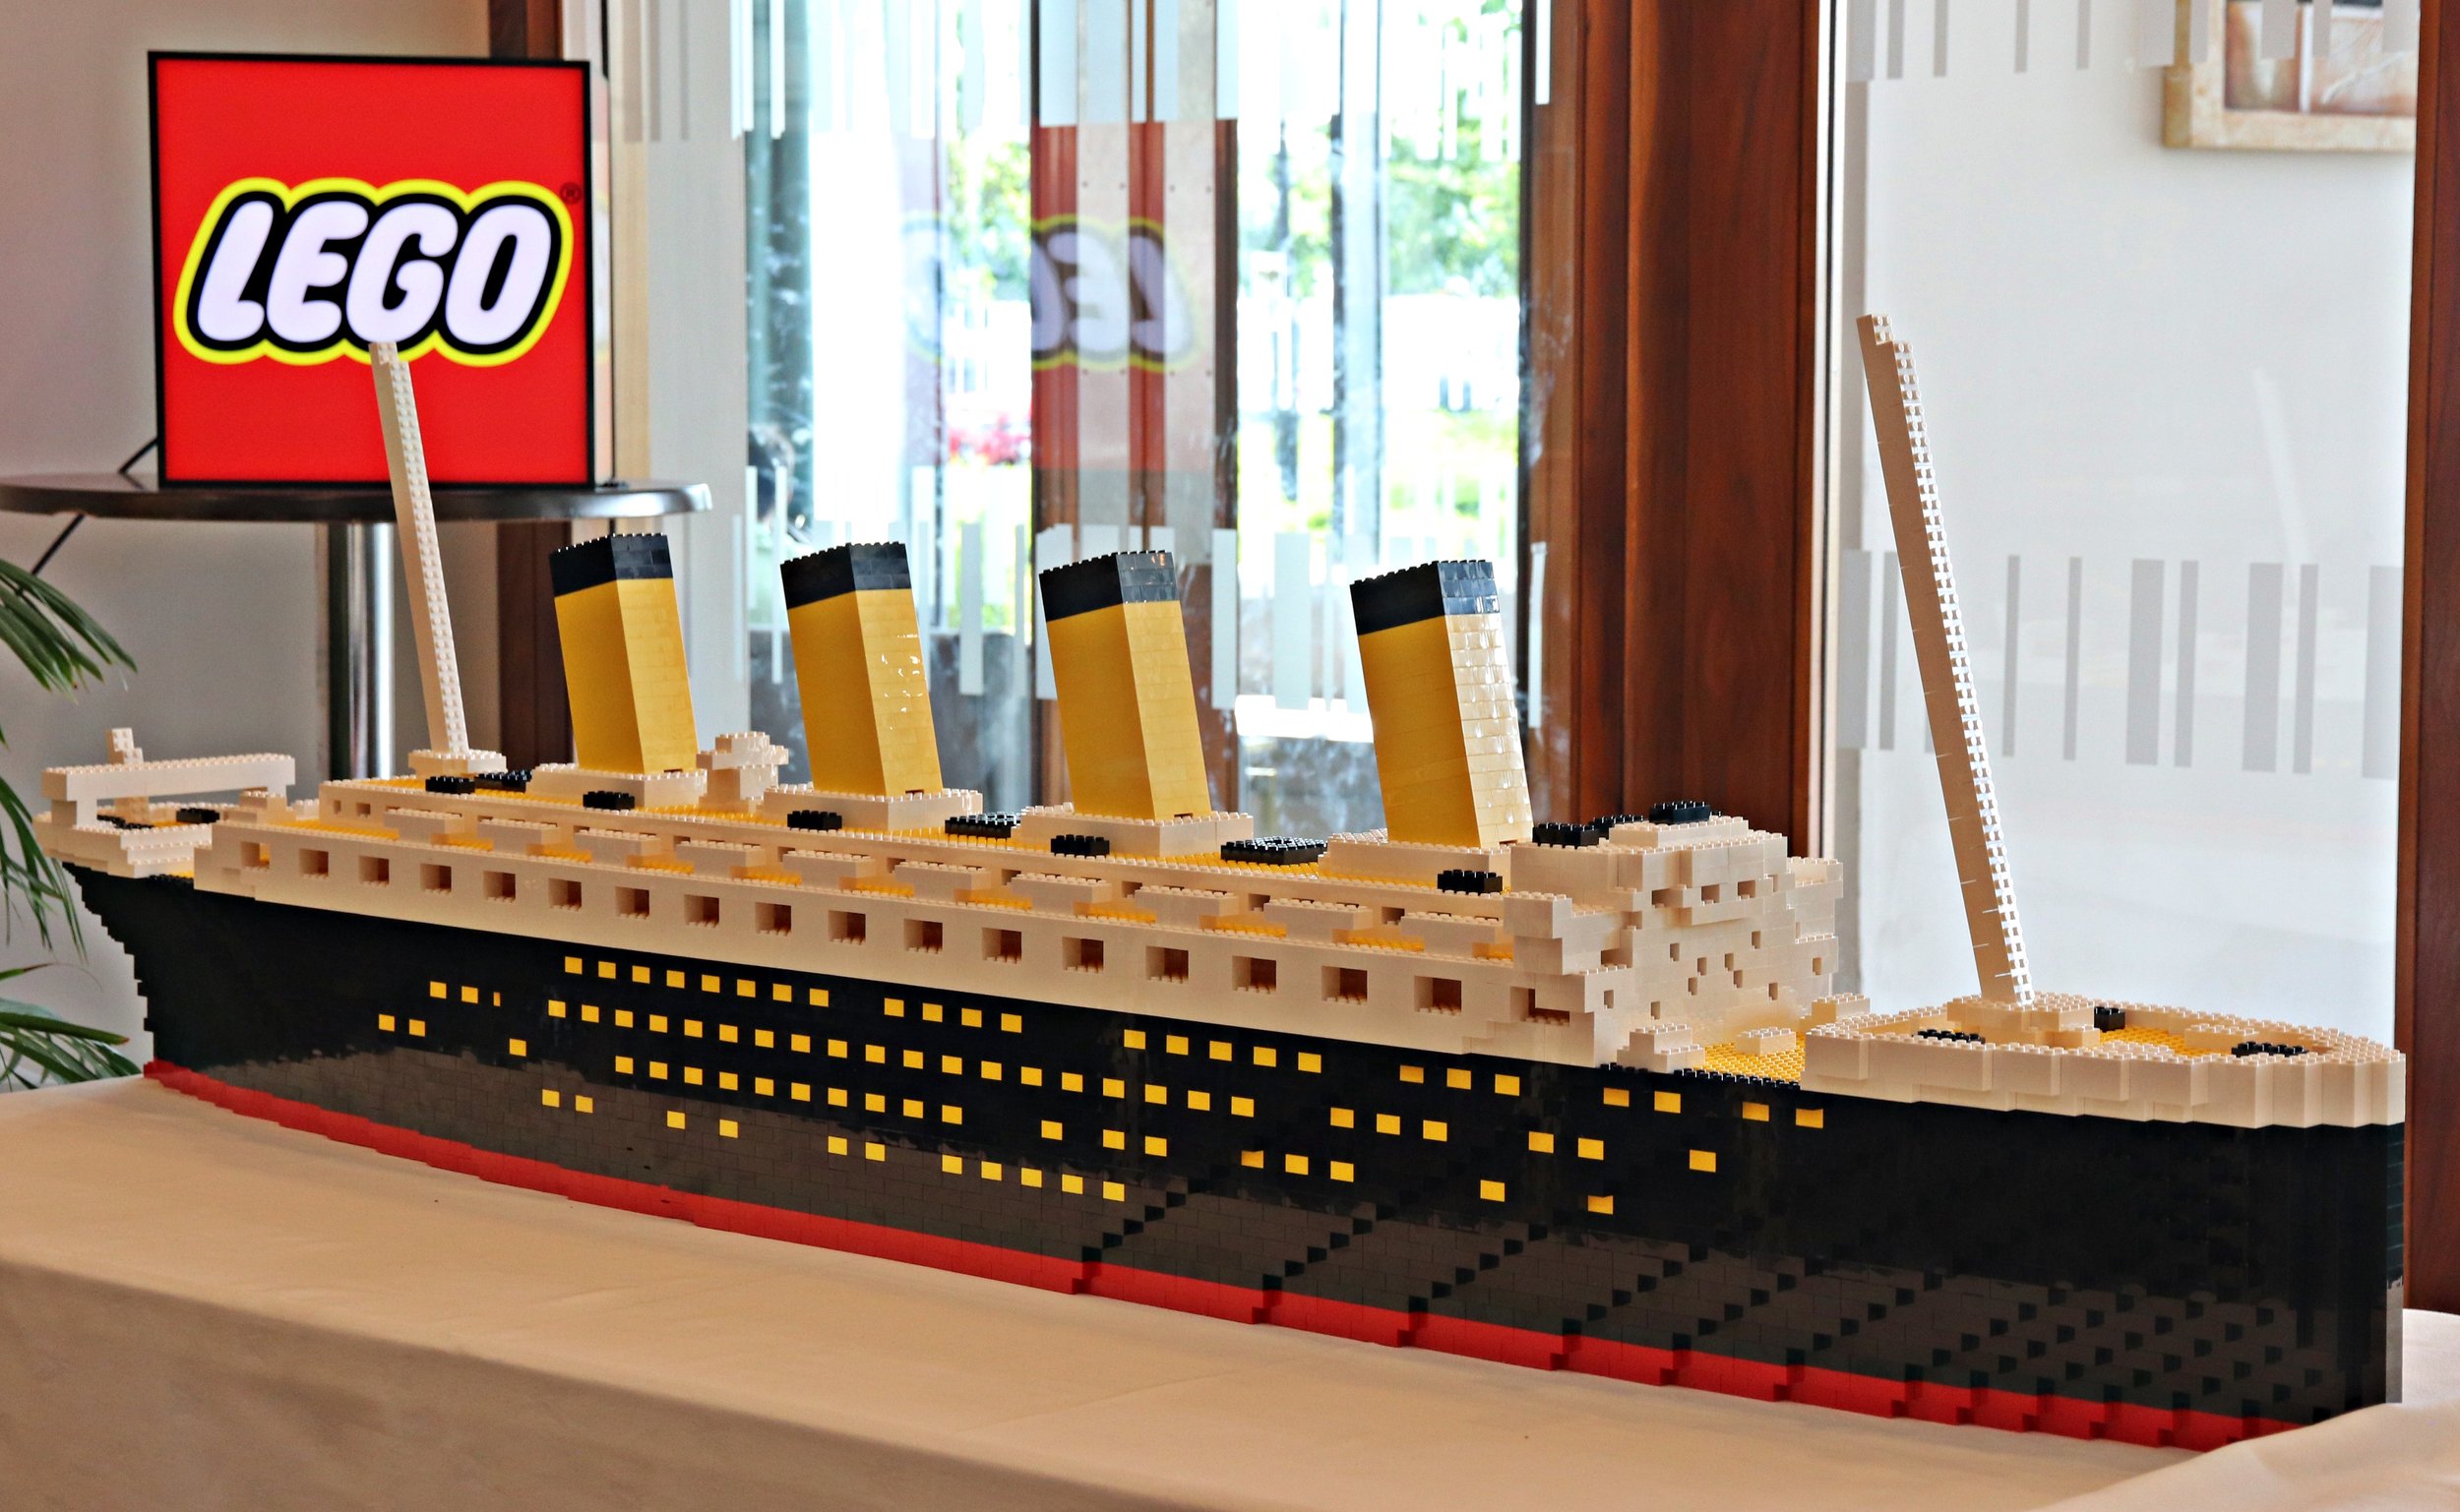 Of course, people are scalping the LEGO Titanic set - Jay's Brick Blog